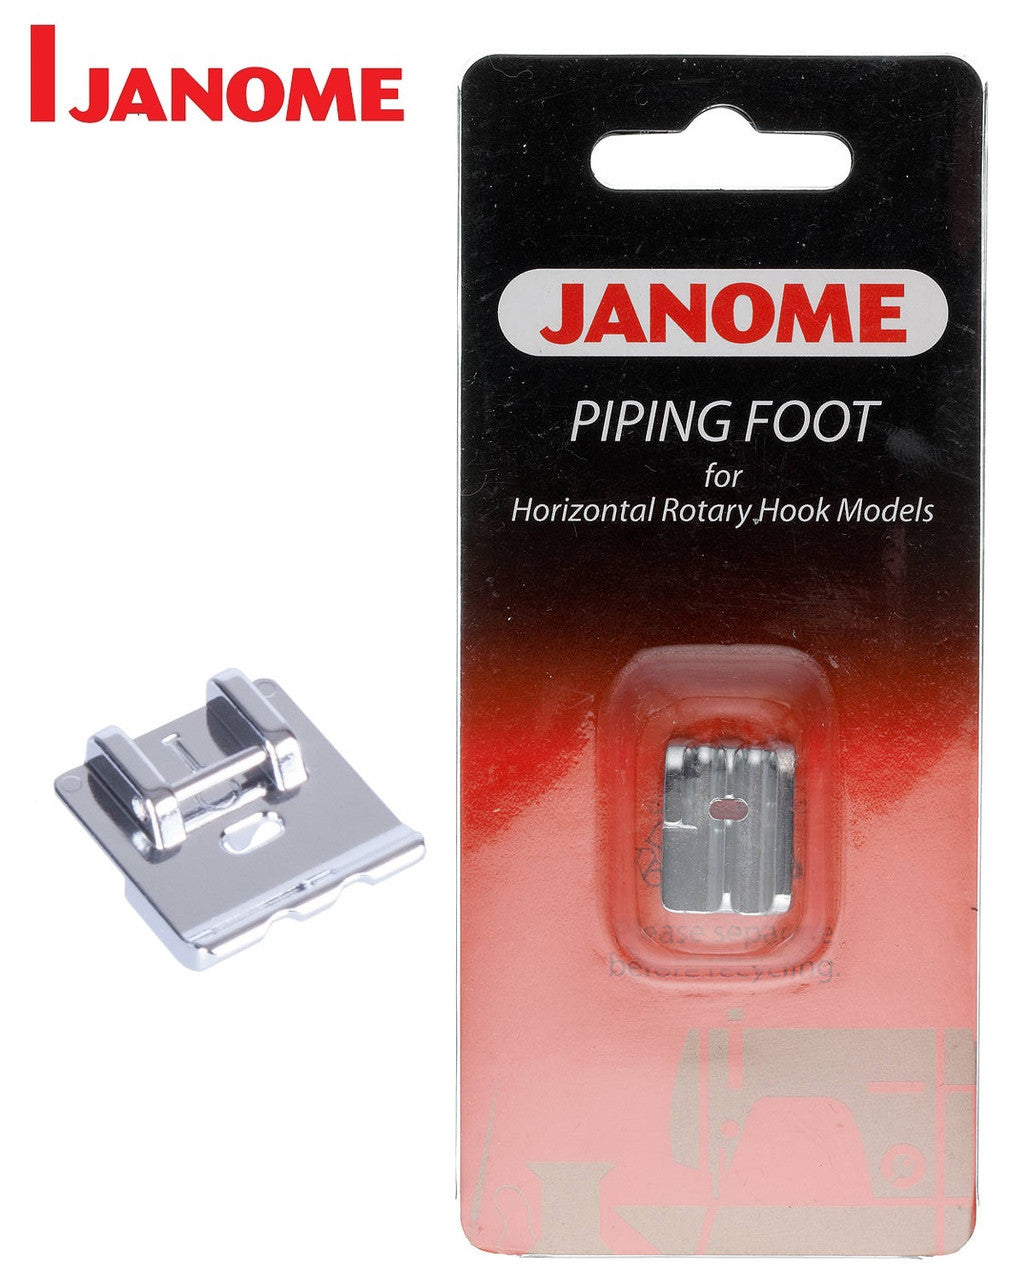 Janome Piping Foot Category B/C